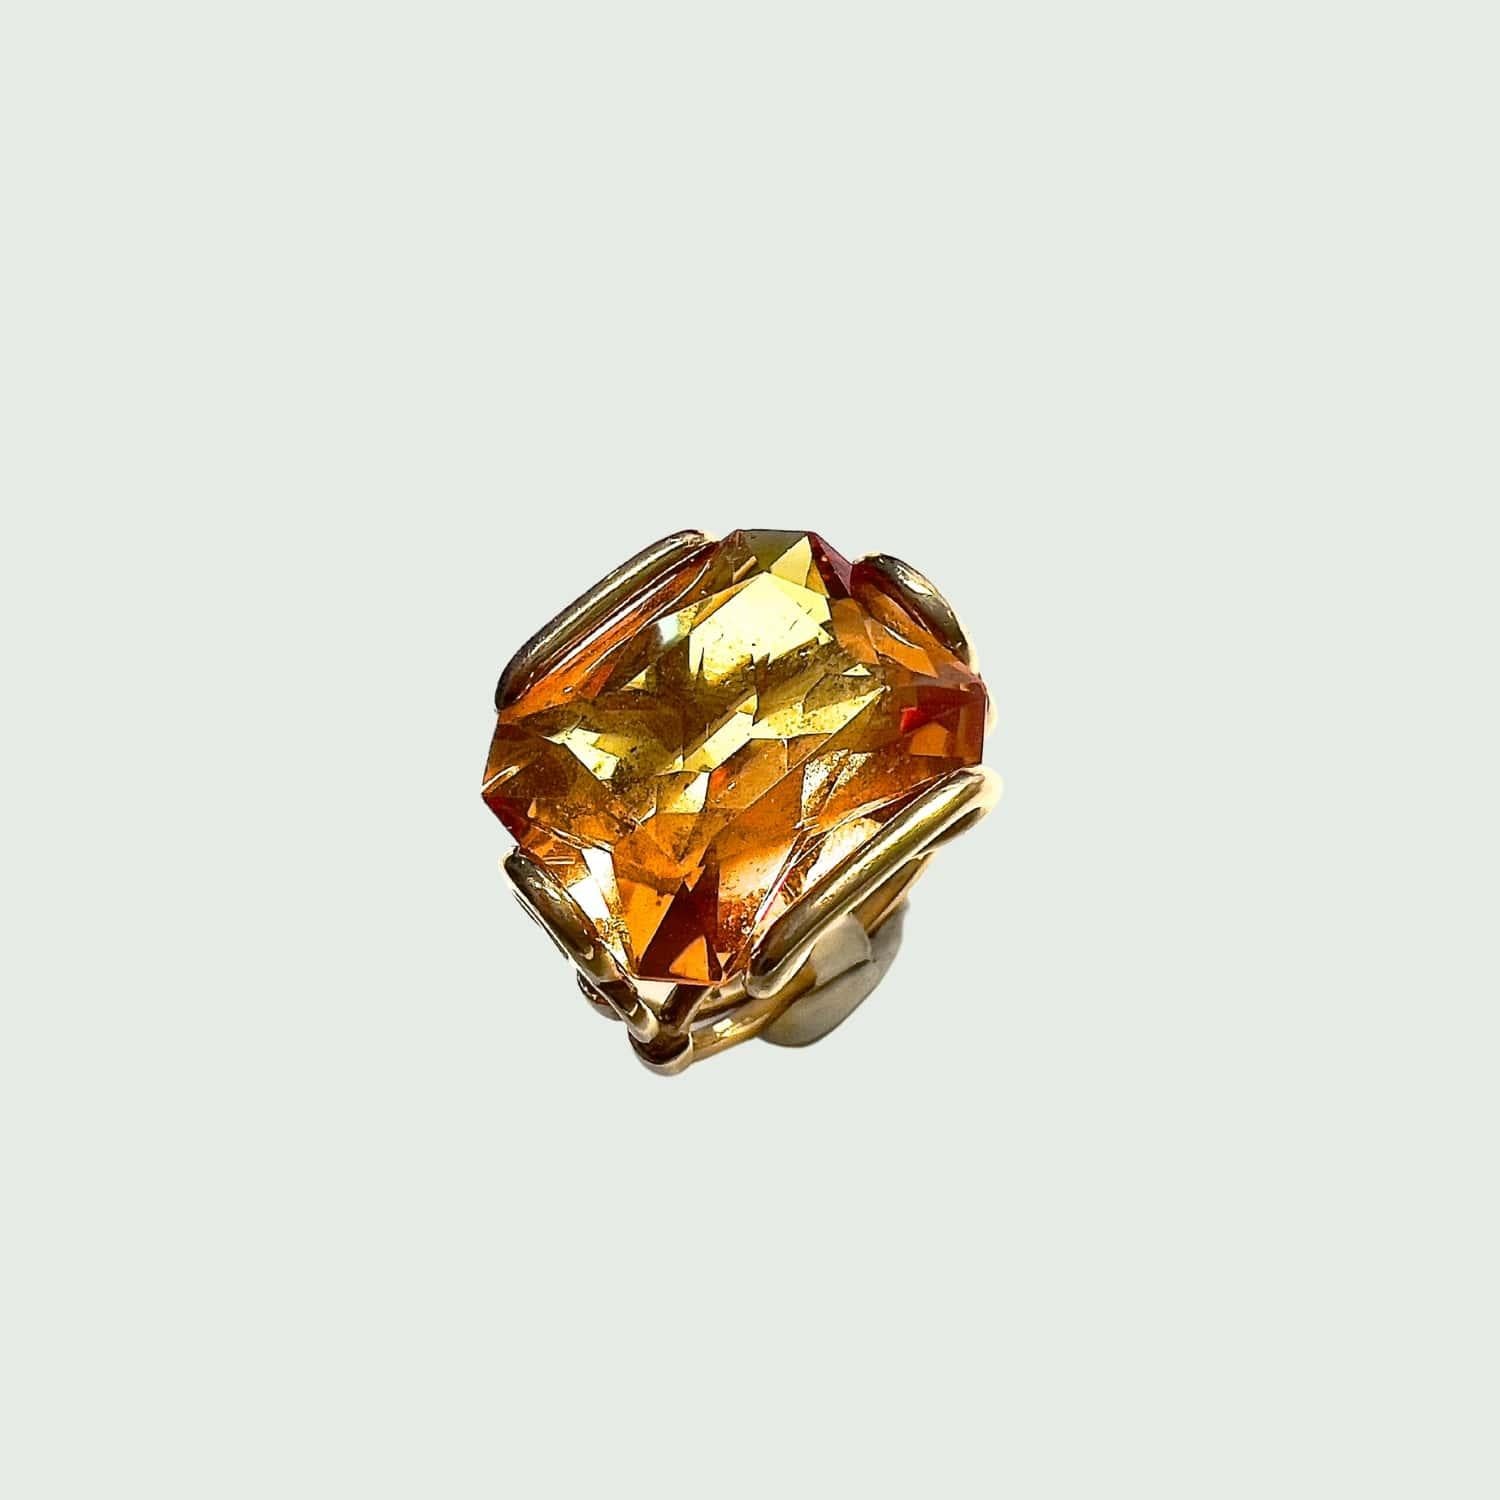 Introducing a captivating piece of modern jewelry: the 21st Century Citrine Spinel Ring crafted from 18-karat yellow gold. This exquisite ring features a vibrant citrine spinel gemstone, adding a pop of color and sophistication to any ensemble.
What